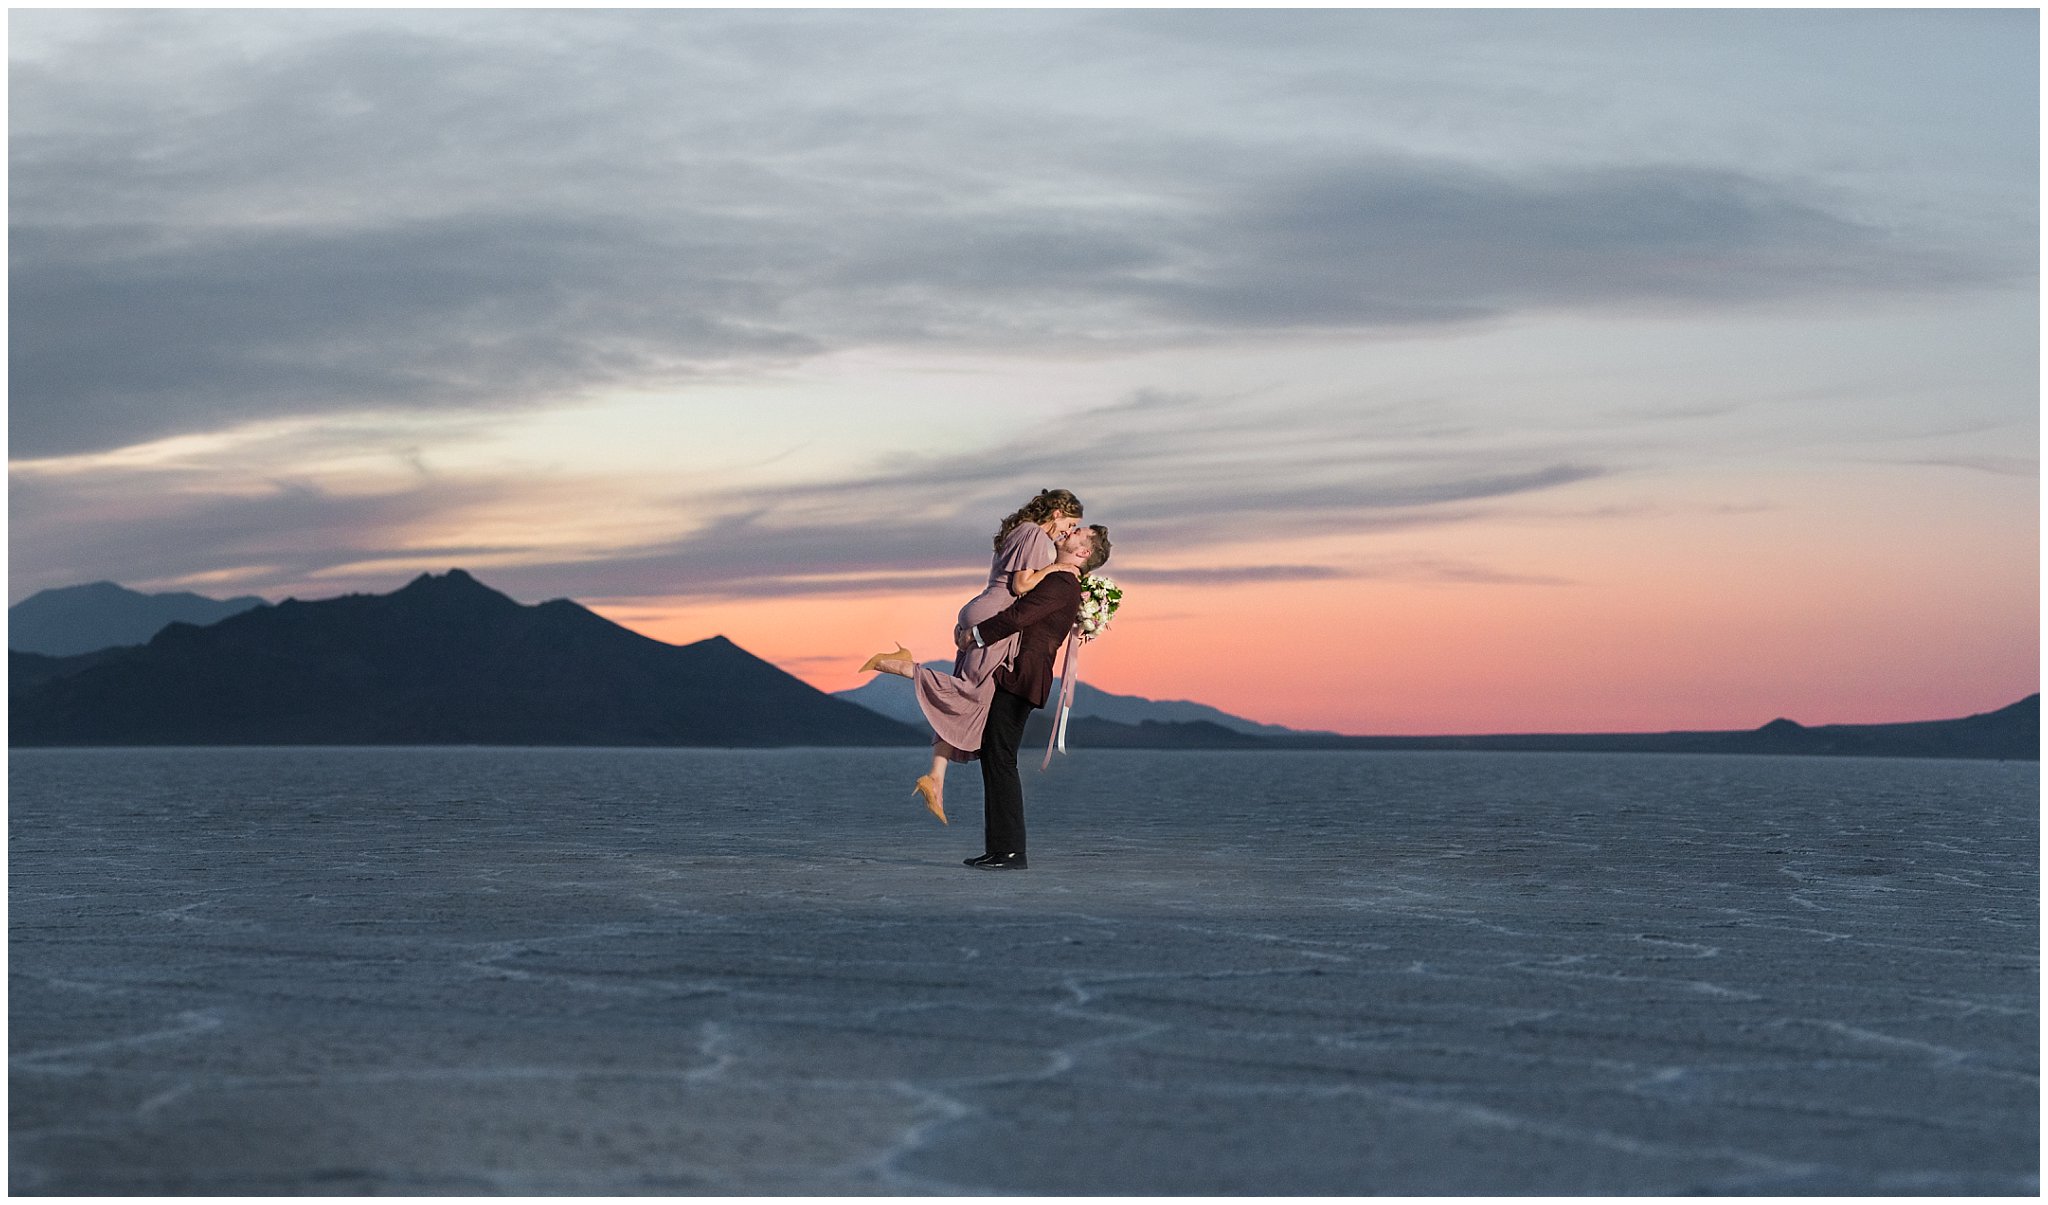 Couple during sunset wearing a dusty rose dress and burgundy suit with white and pink bouquet at the Bonneville Salt Flats | Bonneville Salt Flats Milky Way Anniversary Session | Jessie and Dallin Photography